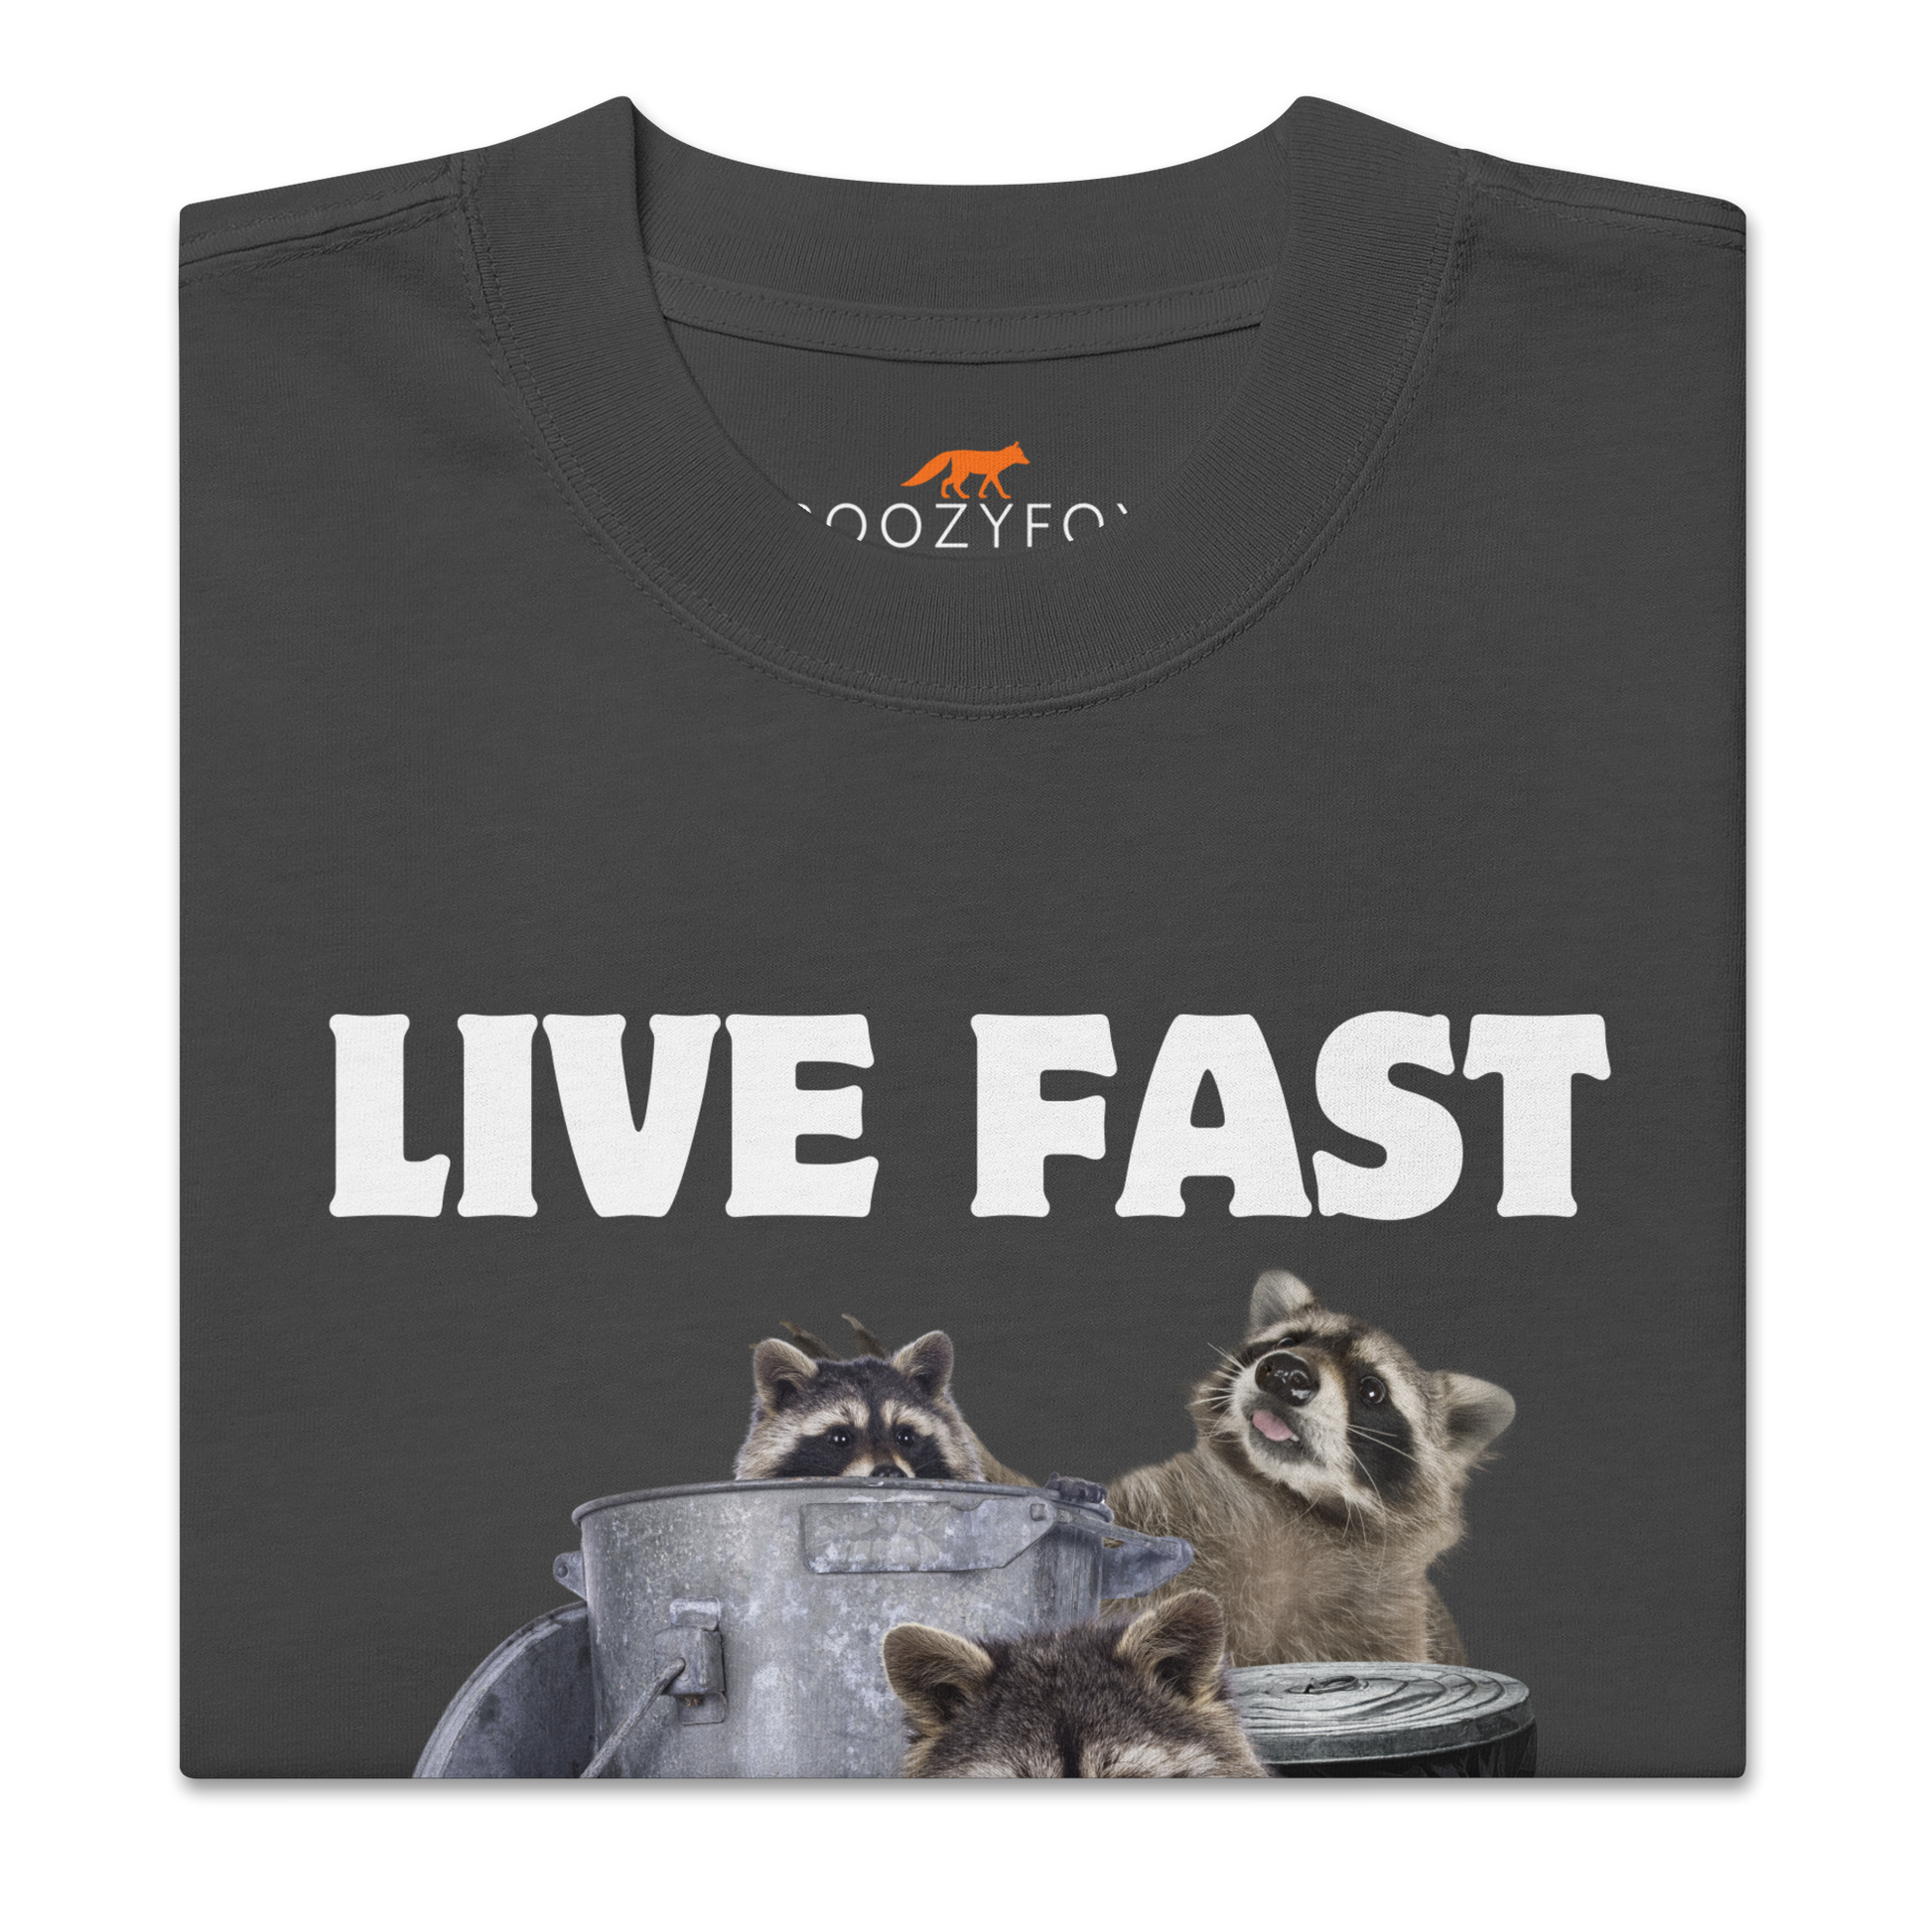 Product details of a Faded Black Raccoon Oversized T-Shirt featuring the bold Live Fast Eat Trash graphic on the chest - Funny Graphic Raccoon Oversized Tees - Boozy Fox